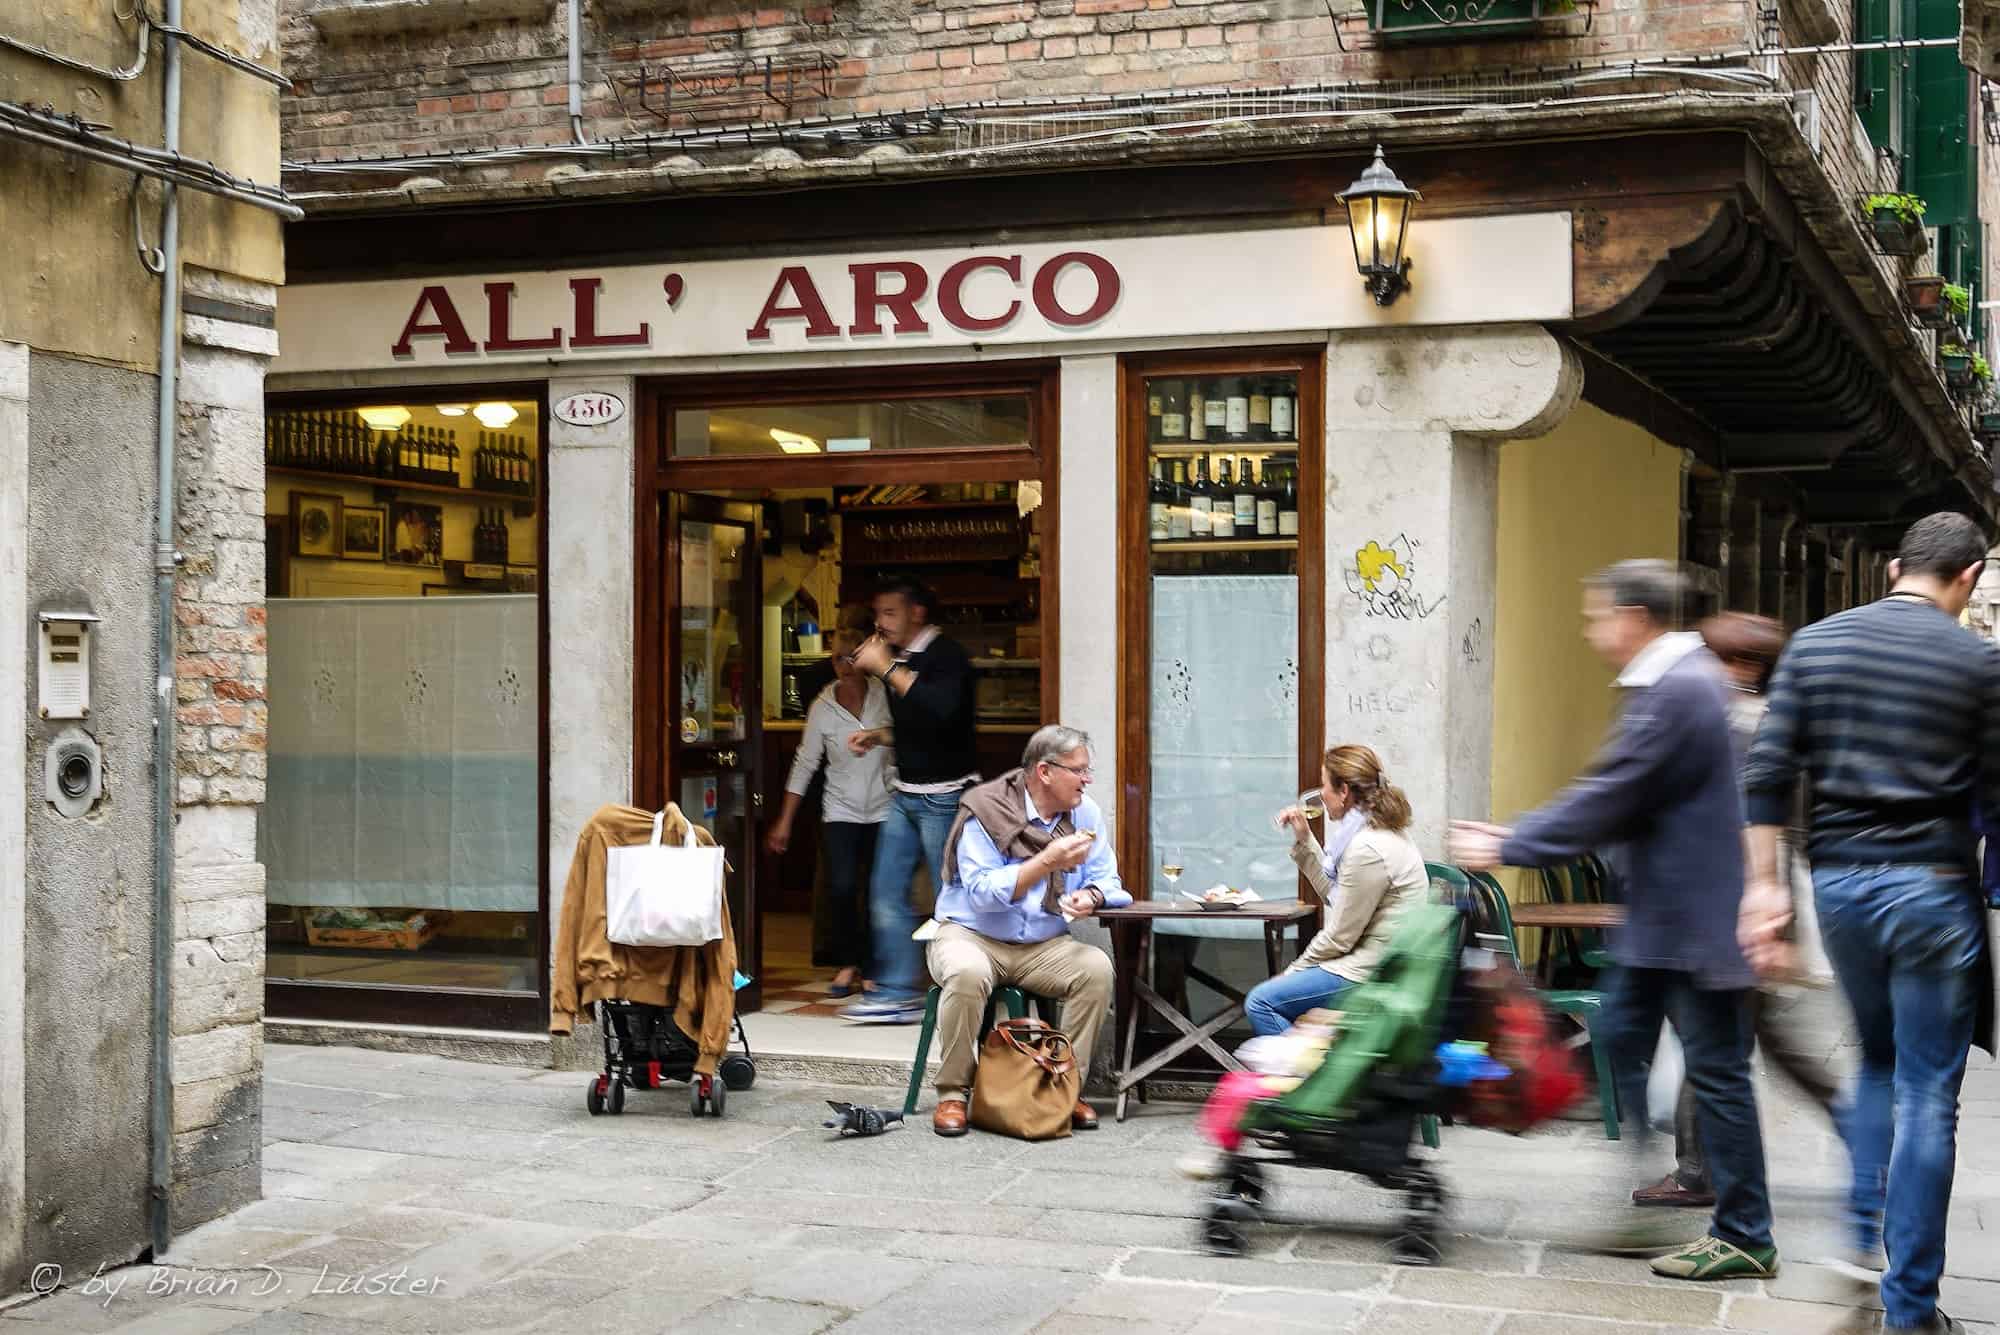 48 Hours in Venice: A Weekend of Italian Food, Art and Culture